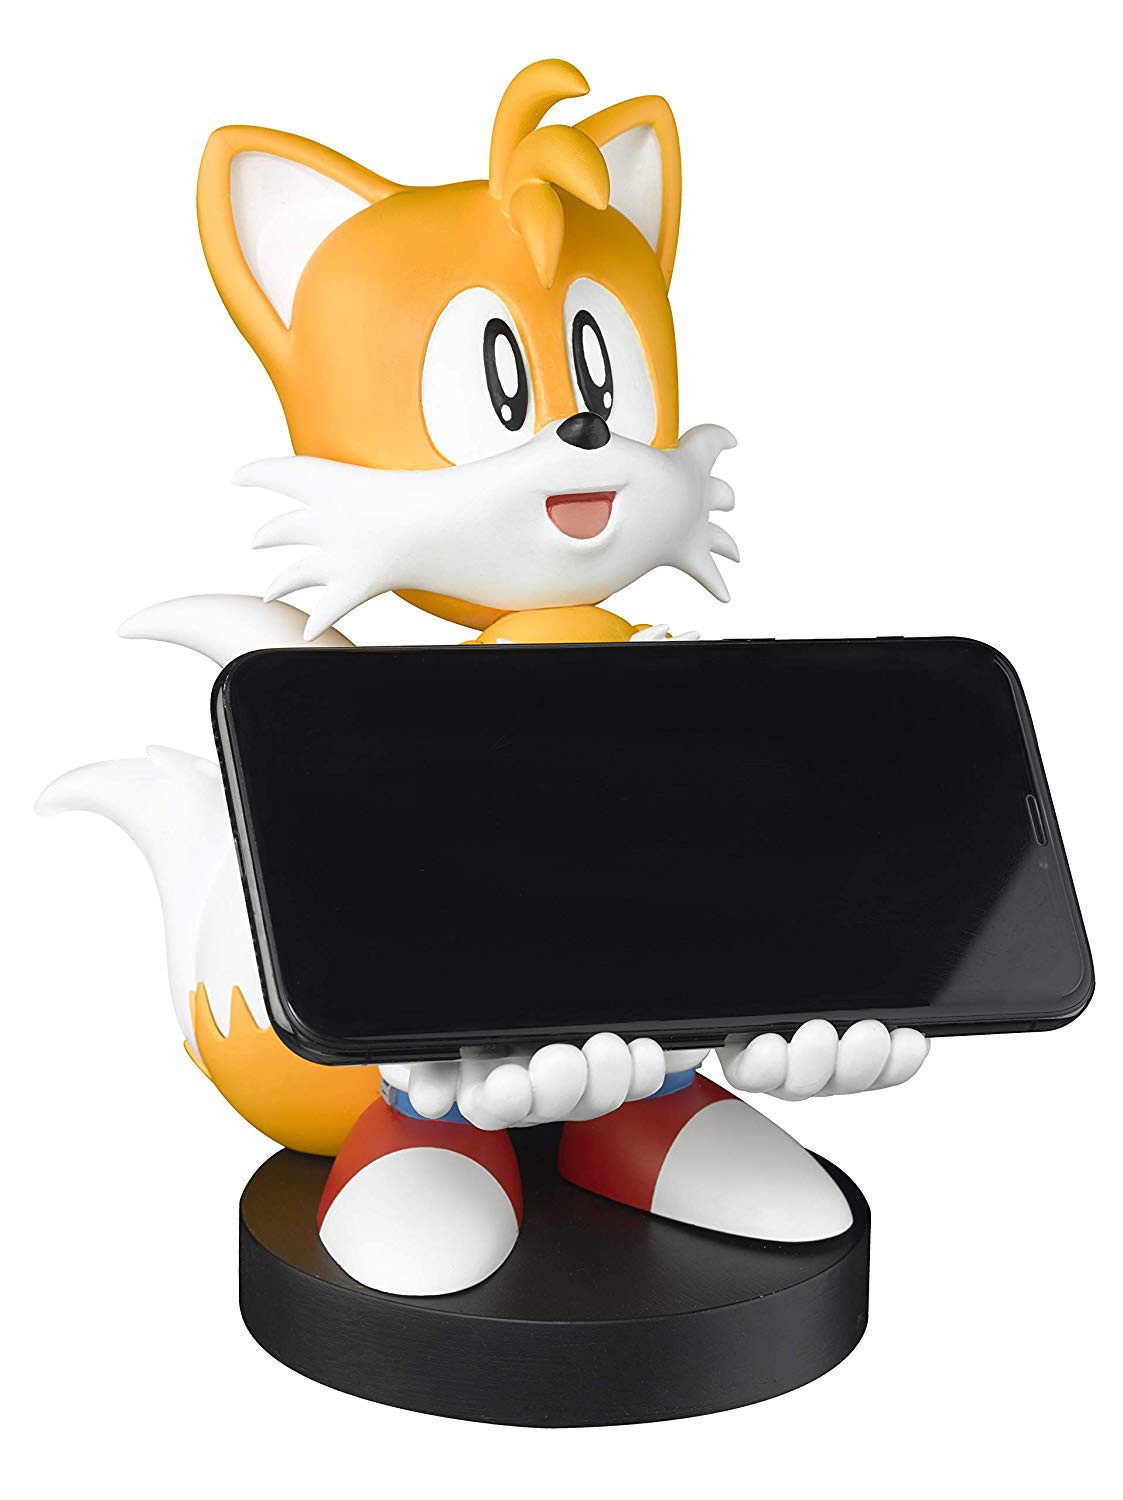 Sonic the Hedgehog - Tails Cable Guy stand